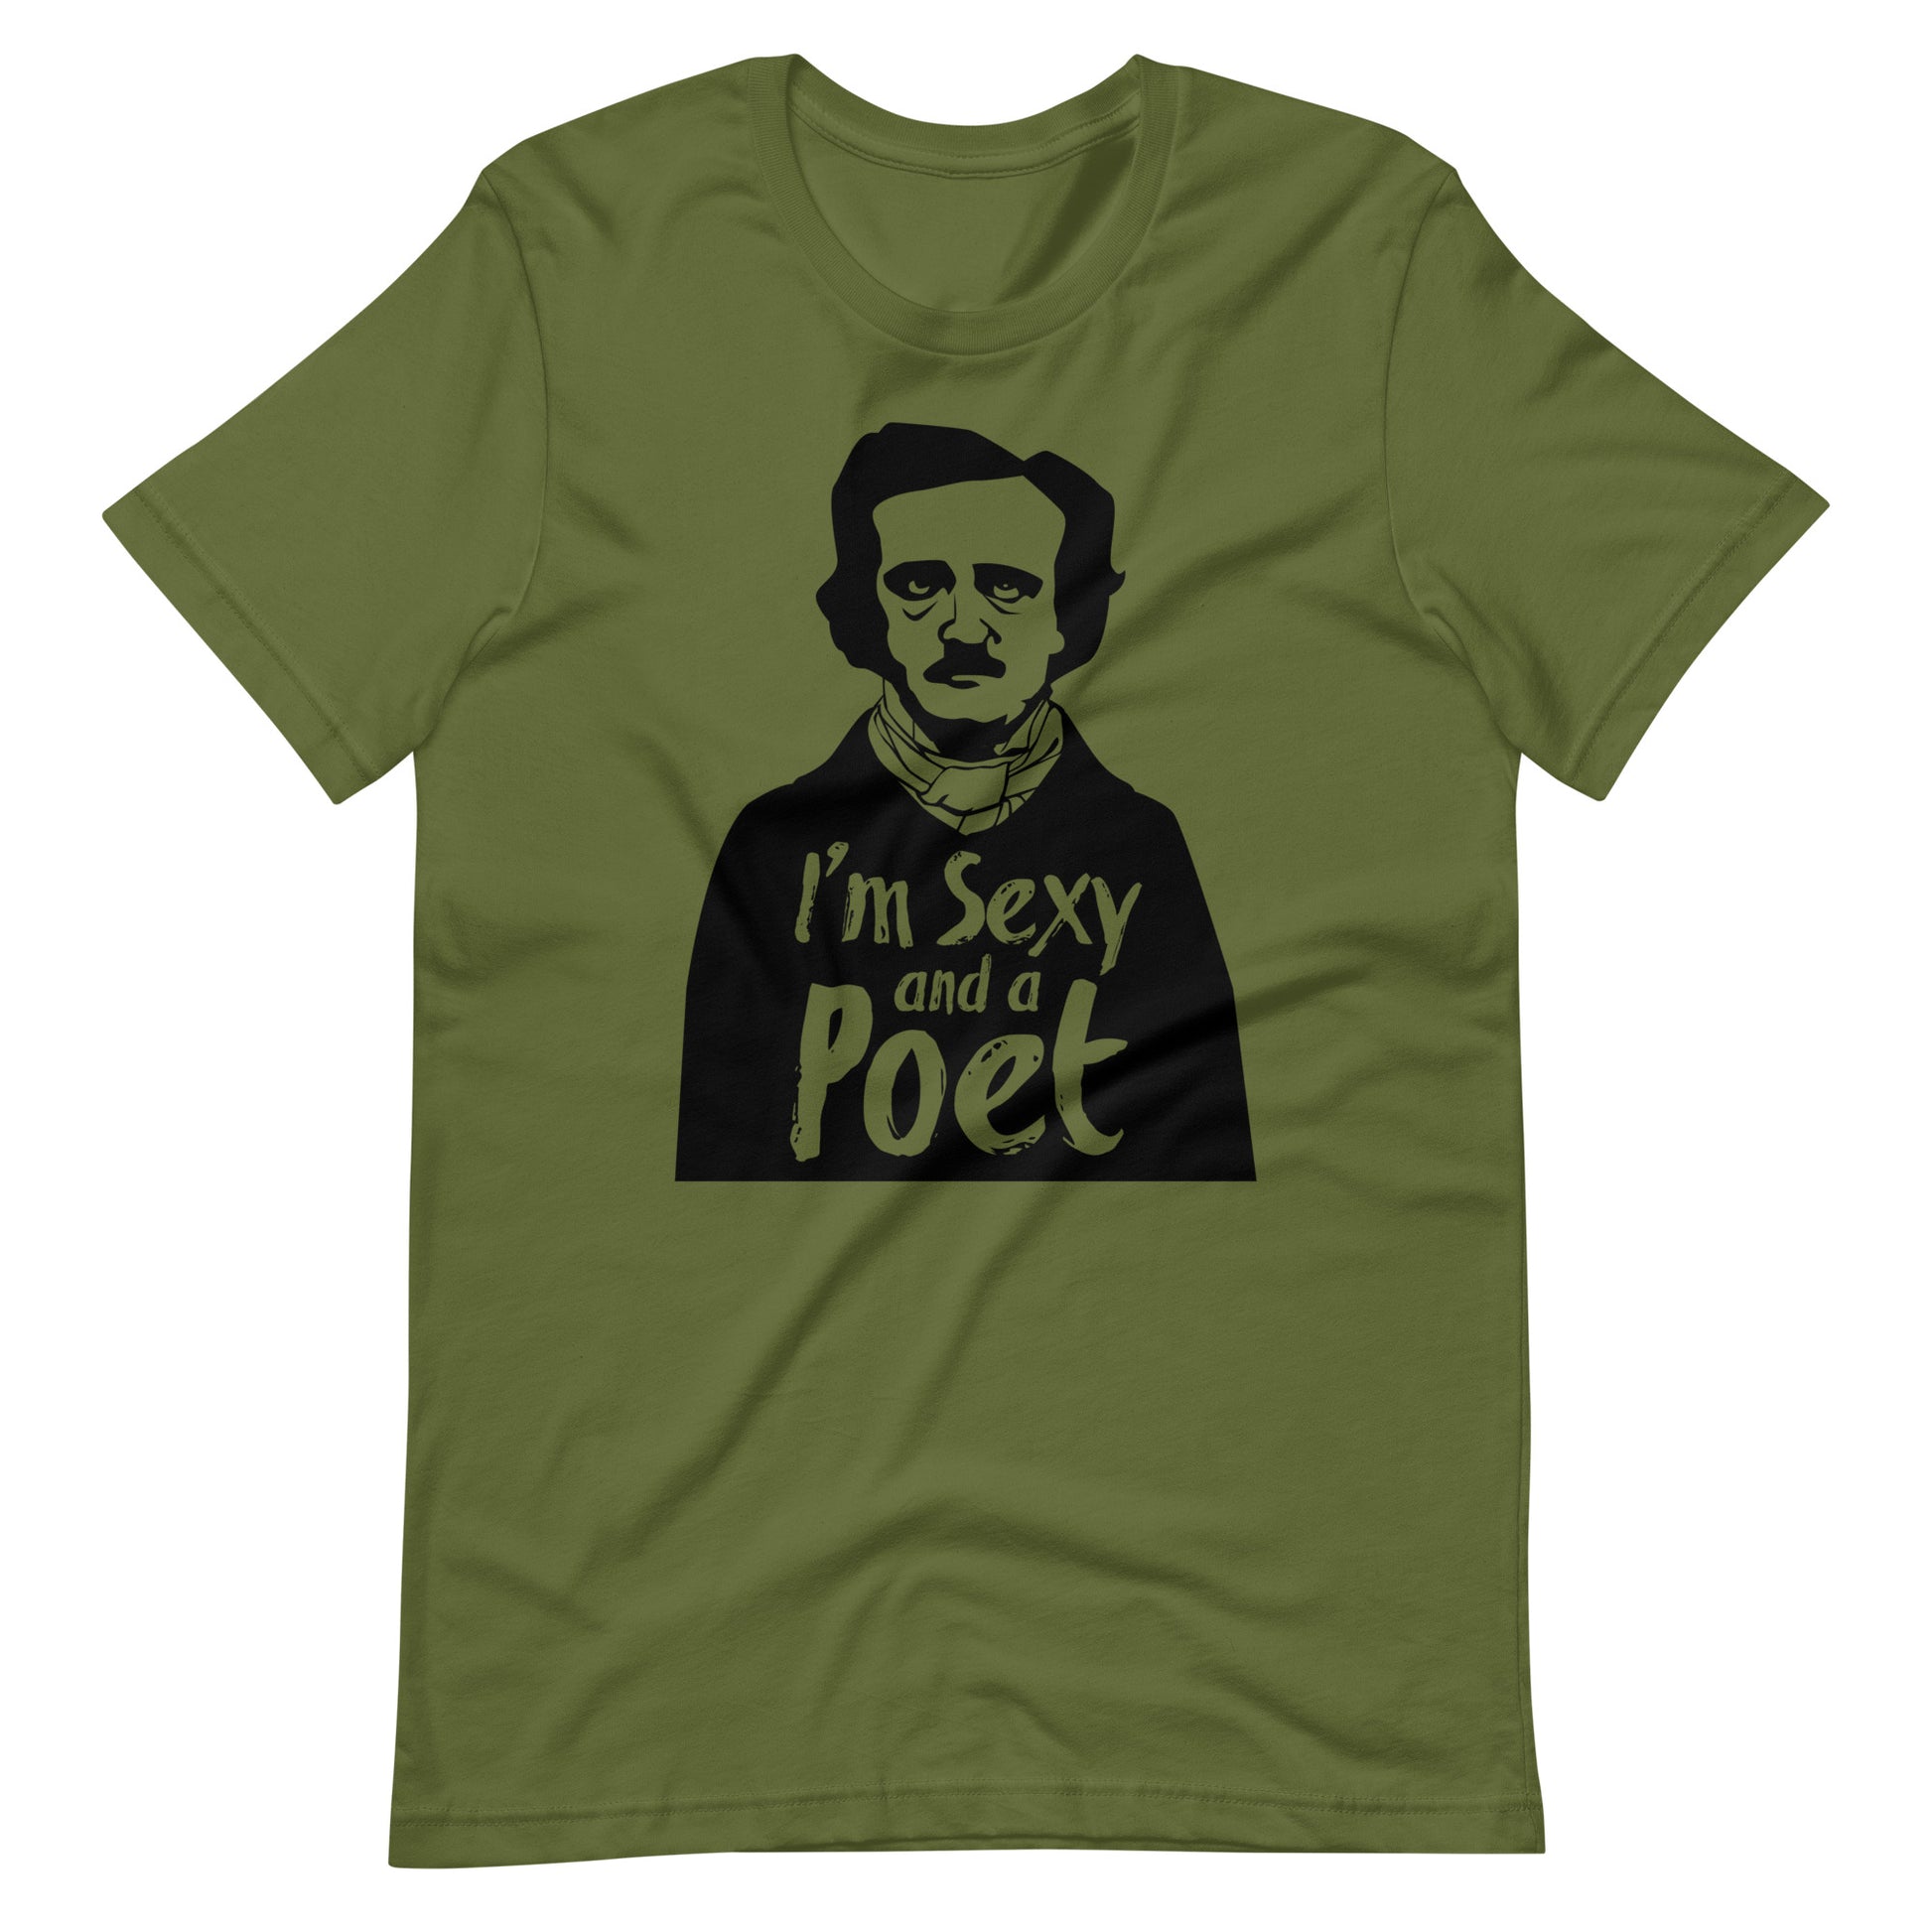 Women's Edgar Allan Poe "I'm Sexy and a Poet" t-shirt - Olive Front